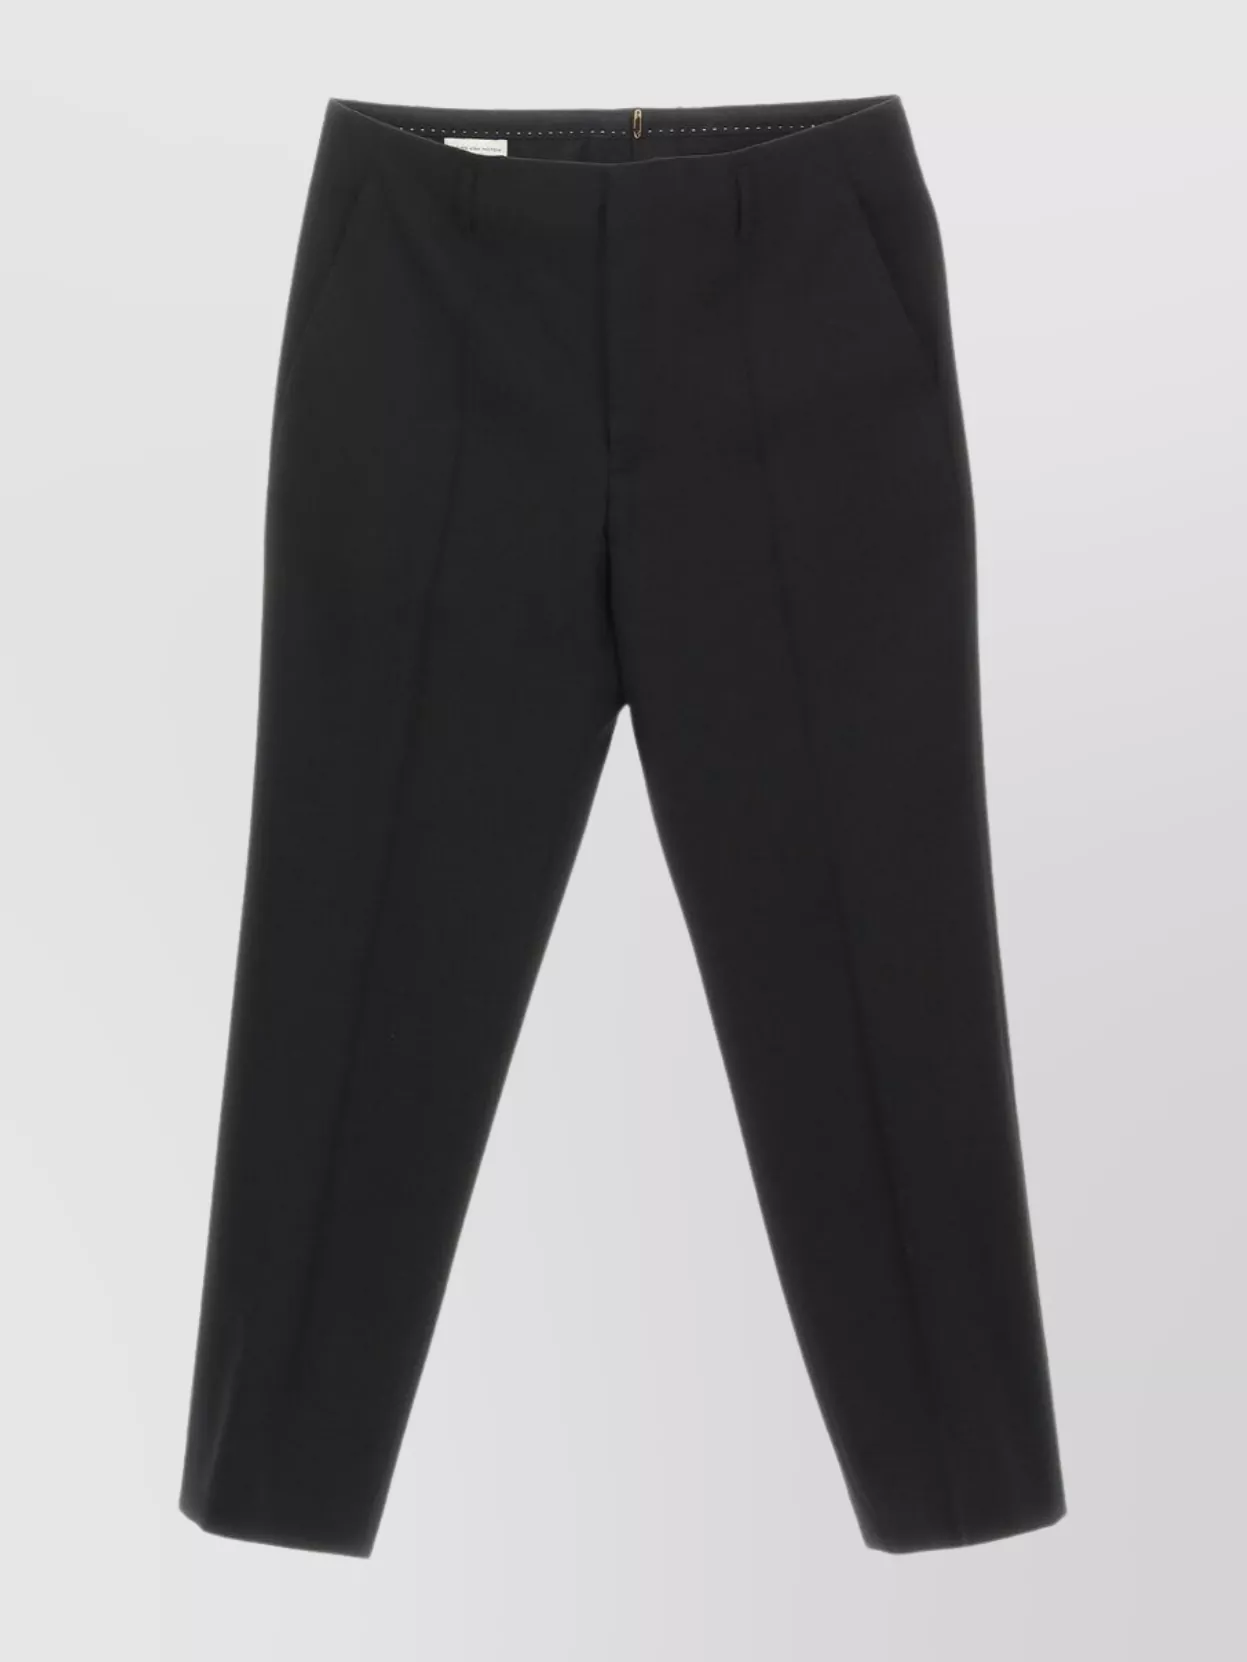 Shop Dries Van Noten Tailored Cropped Trousers Length